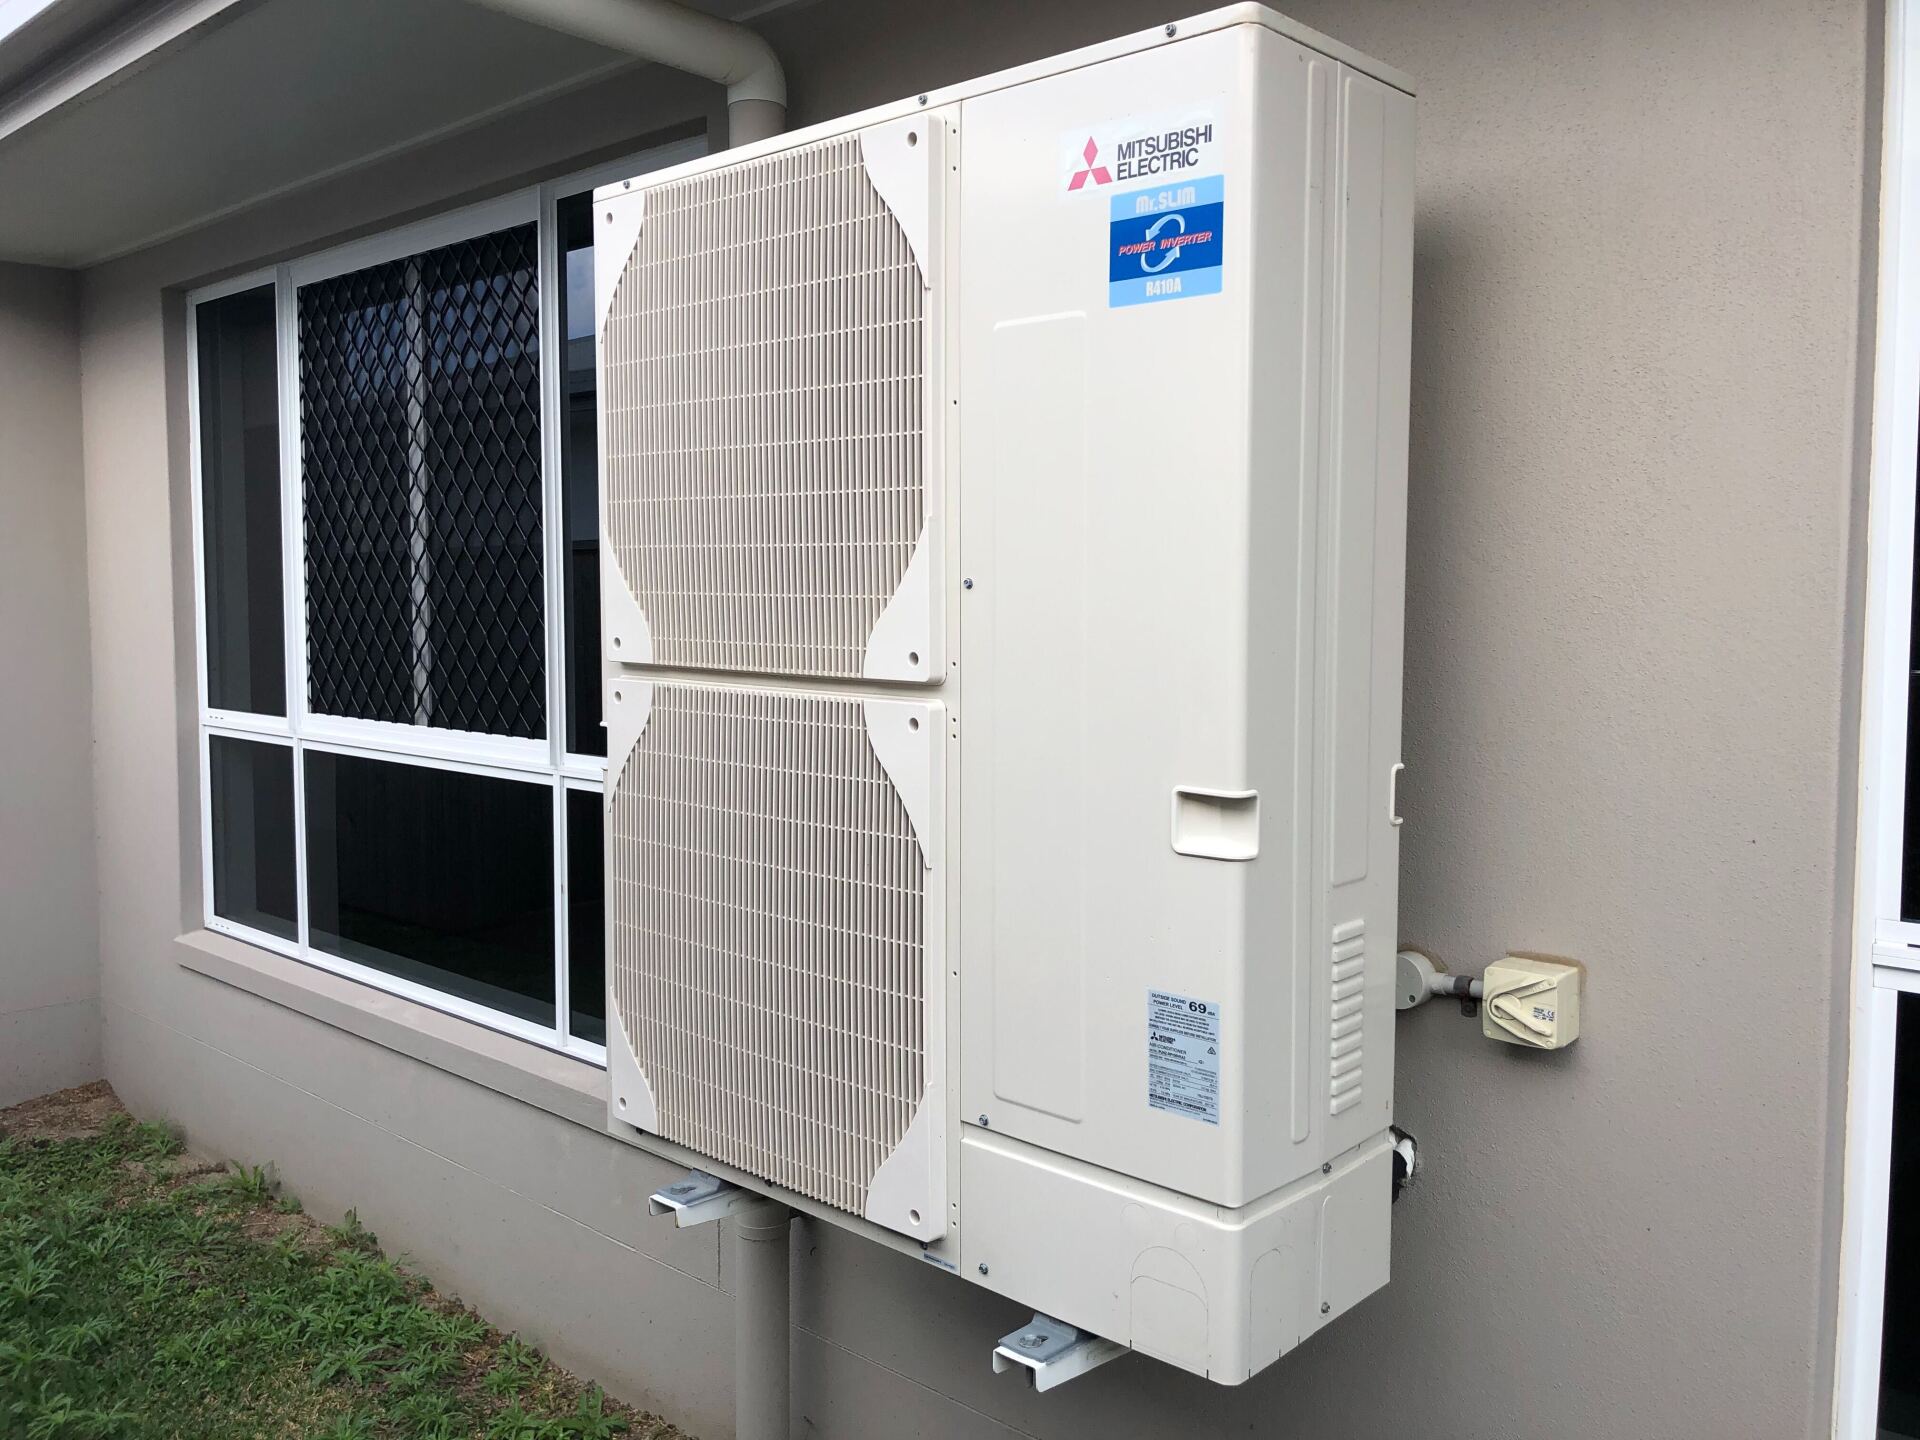 Mitsubishi Electric Air Conditioner - Air Conditioning Services in Mackay, QLD